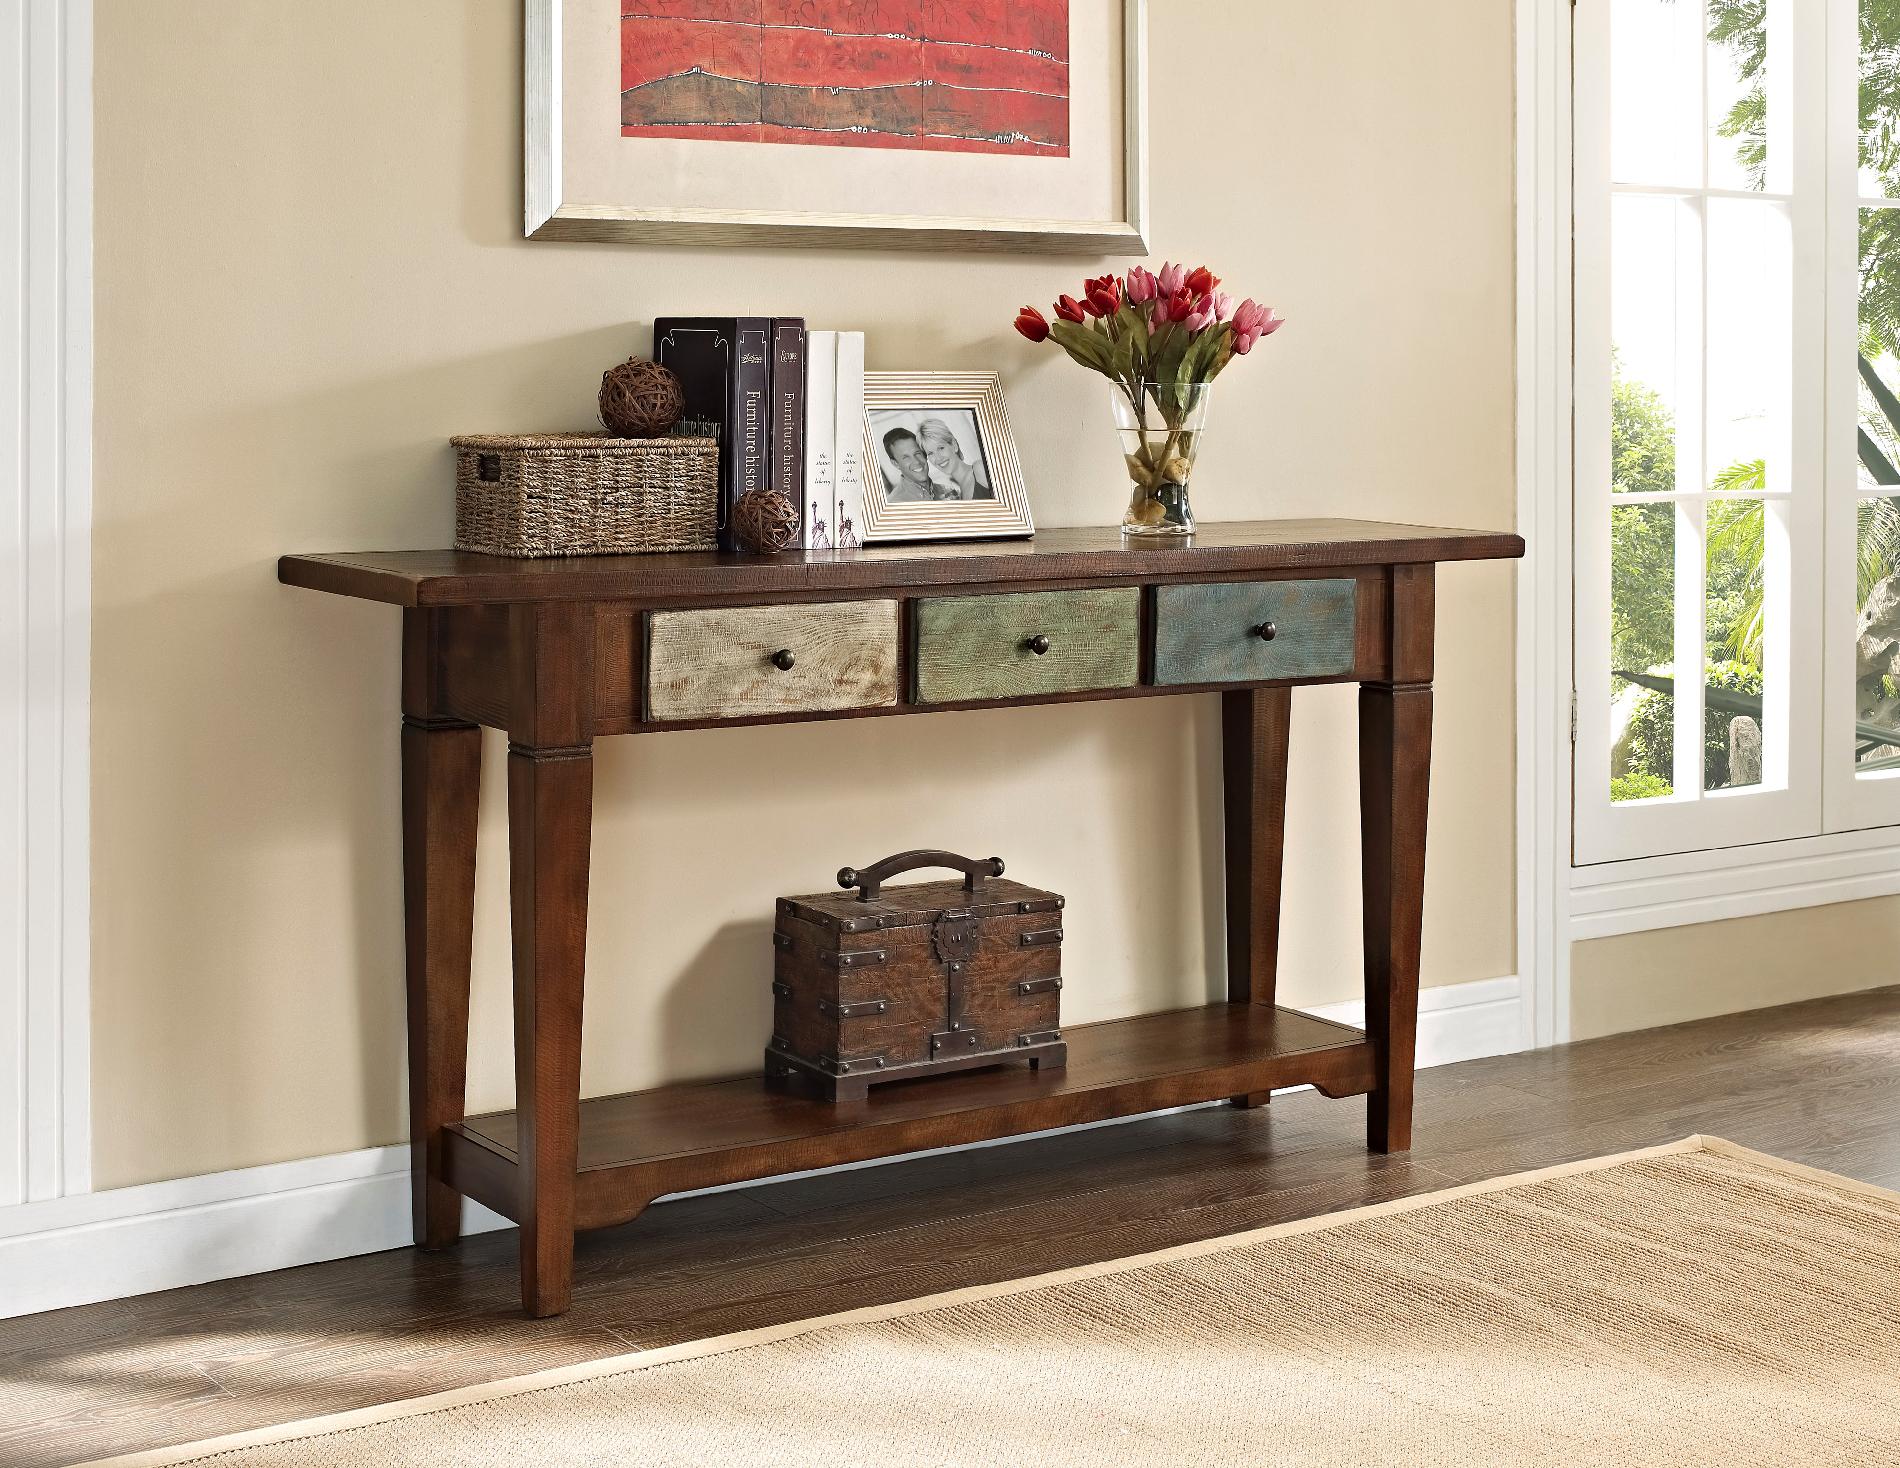 Dorel Home Furnishings Sage Rustic Console Table with 